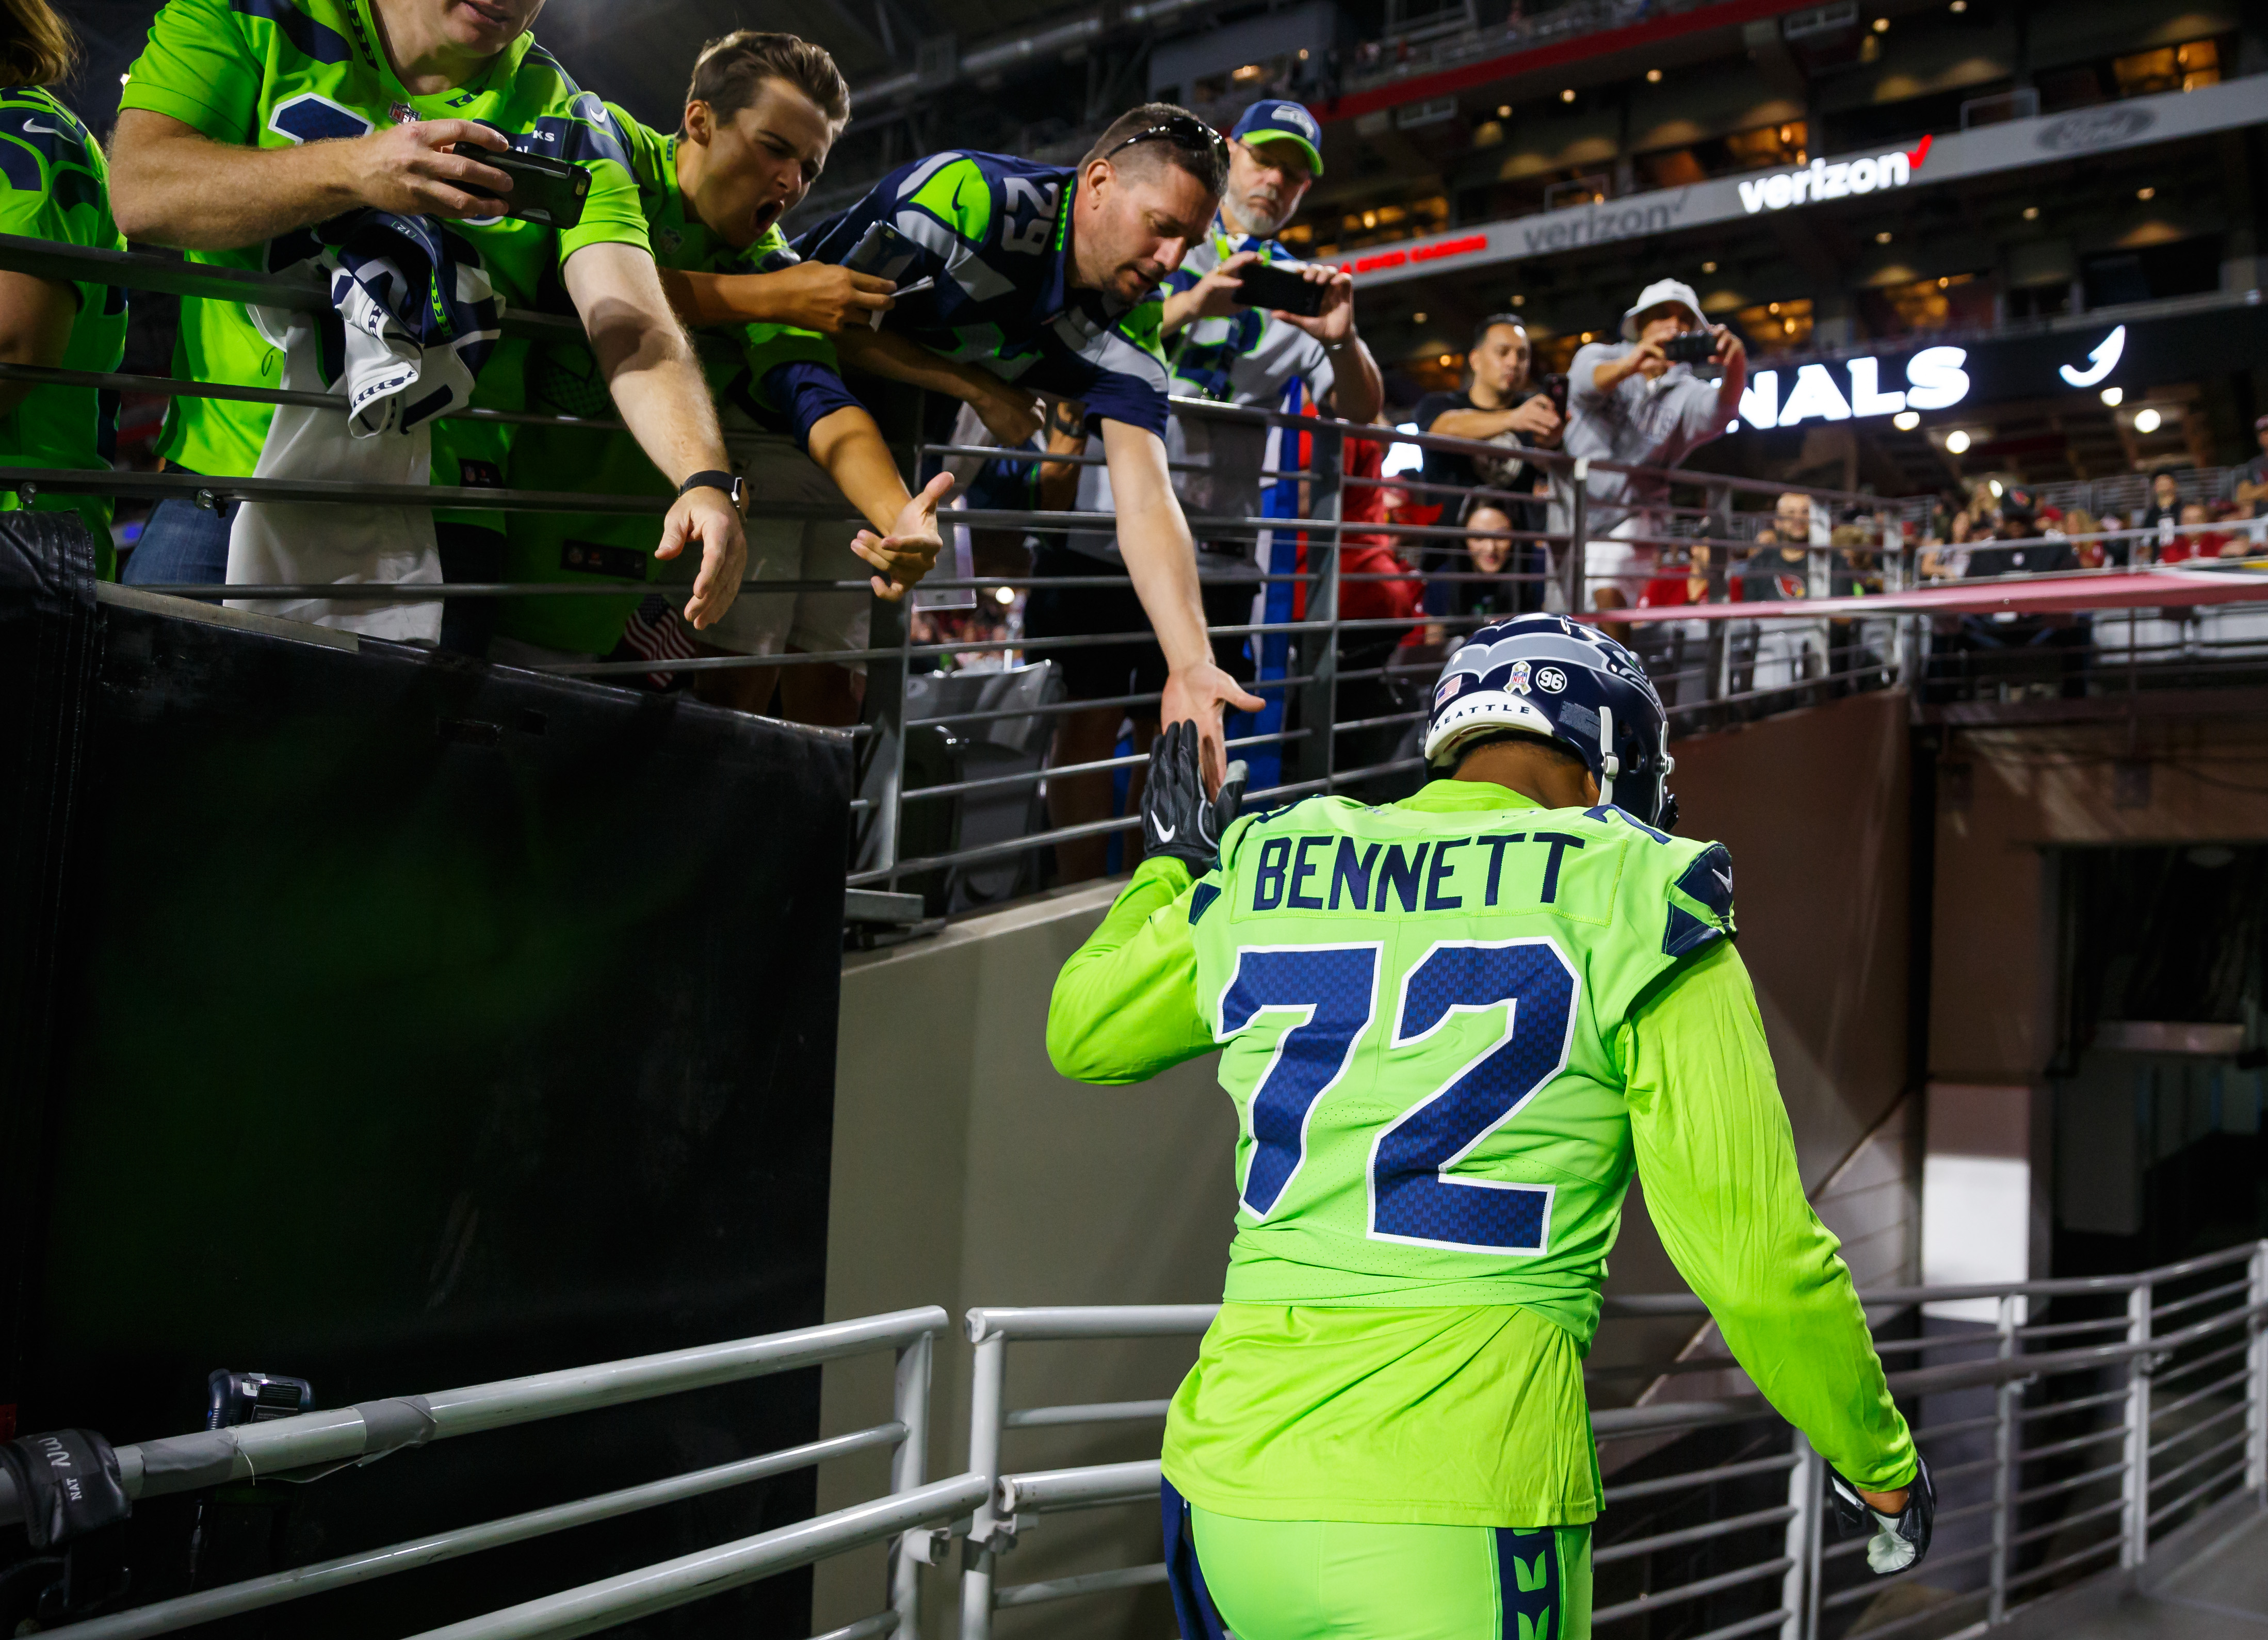 A Look at Michael Bennett, The Las Vegas Incident, and Perceived Character Issues